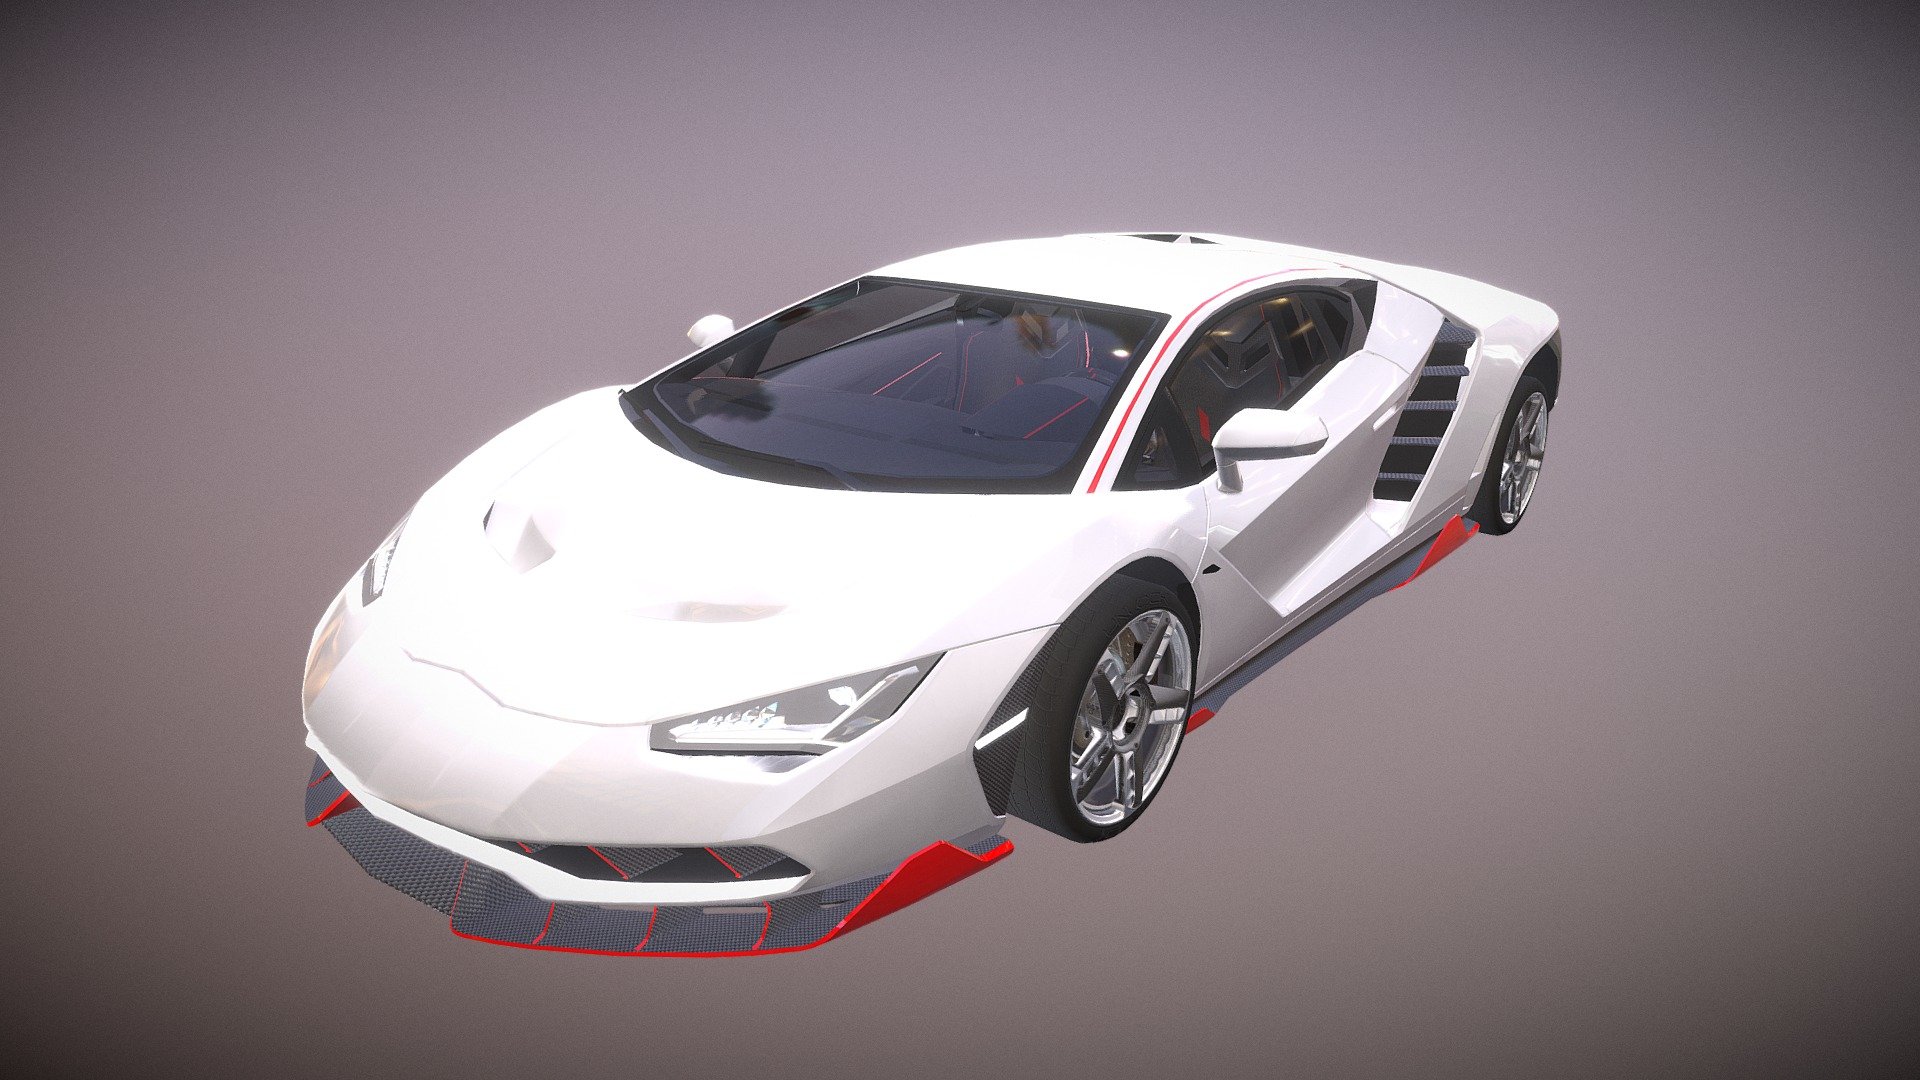 Subscribe and like my videos! - YouTube

https://www.youtube.com/watch?v=CJ0R7ICYbJc&amp;feature=youtu.be

Hypercar model for game.

Unity Asset Store URL:

Coming soon, awaiting review of the asset store team.
 - Unlock Hypercar 01 - 3D model by UnlockGameAssets 3d model